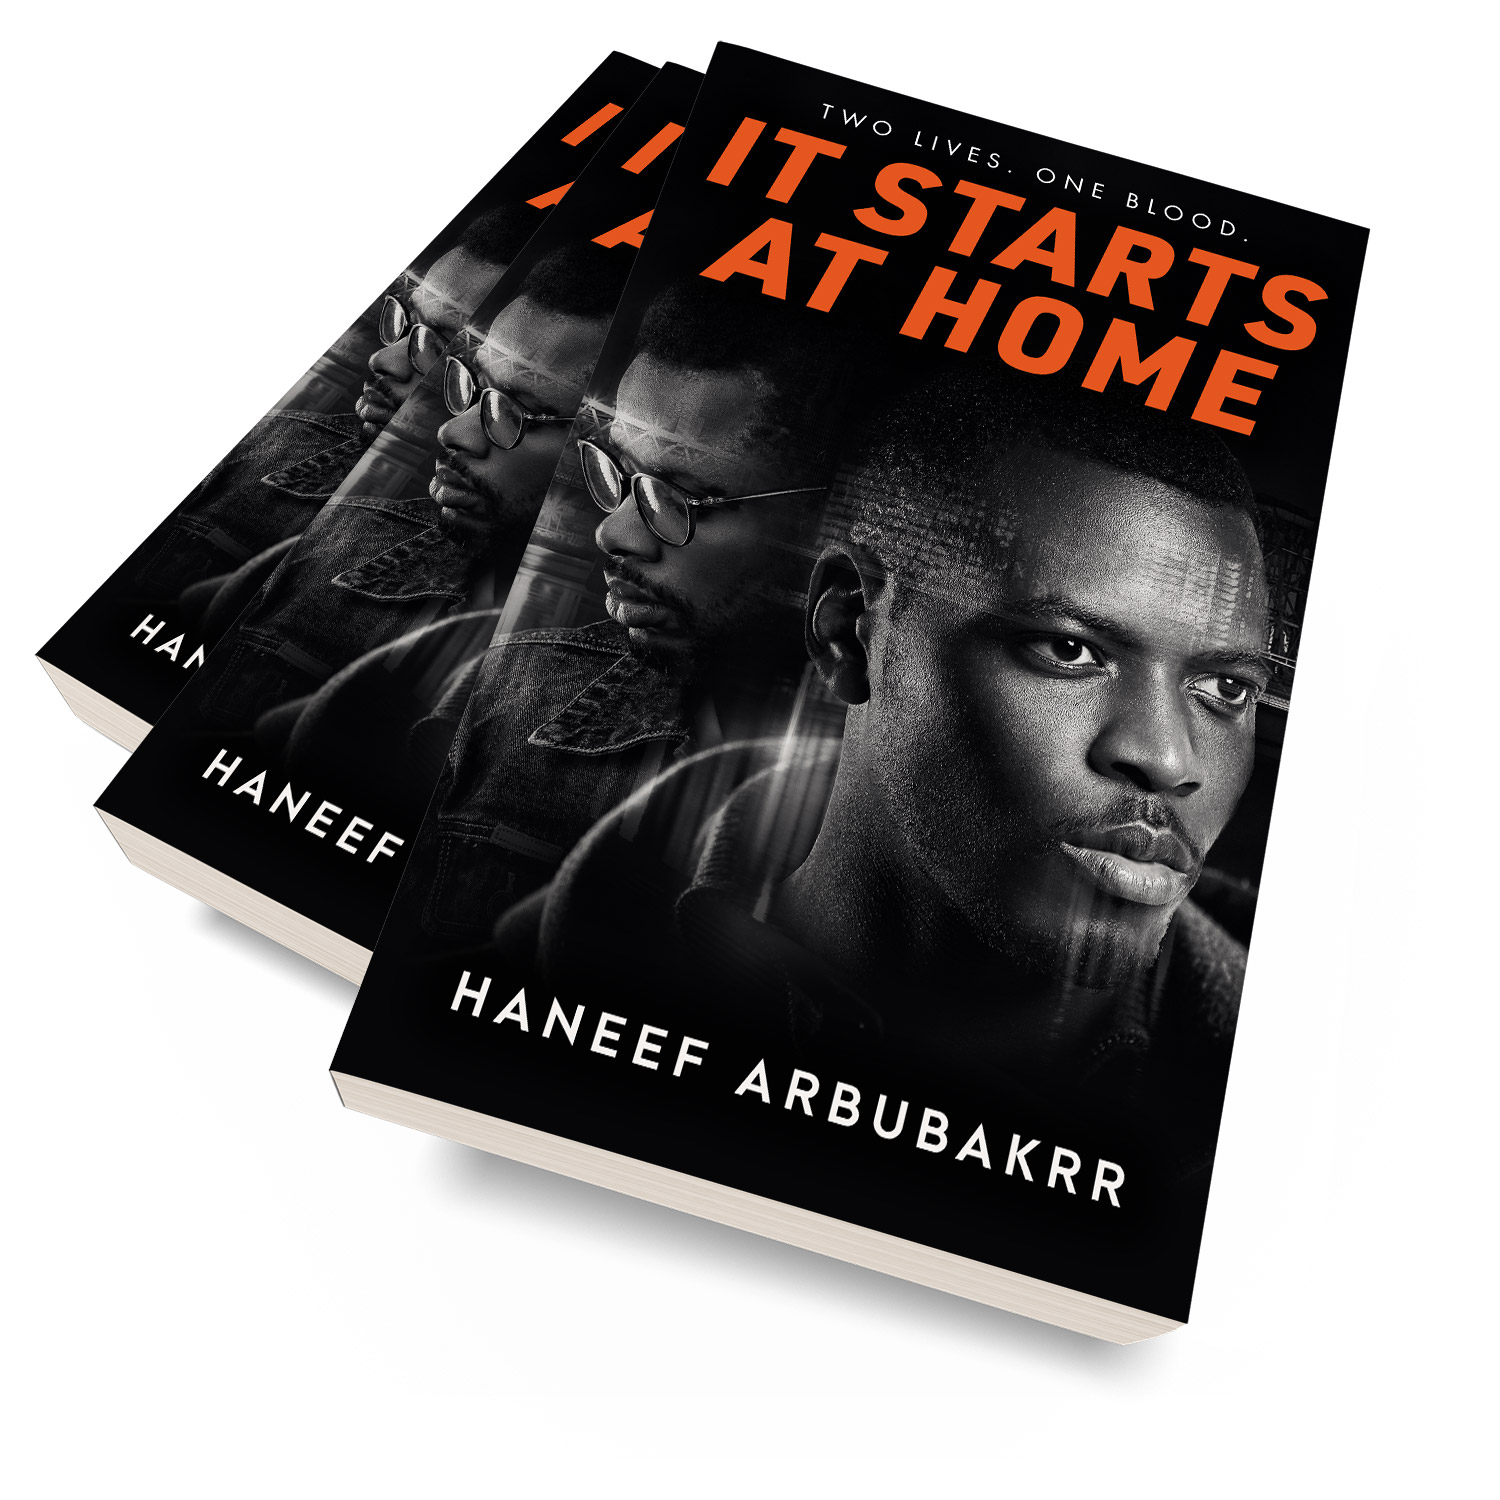 'It Starts At Home' is a gritty urban crime drama. The author is Haneef Arbubakrr. The book cover design and interior formatting are by Mark Thomas. To learn more about what Mark could do for your book, please visit coverness.com.